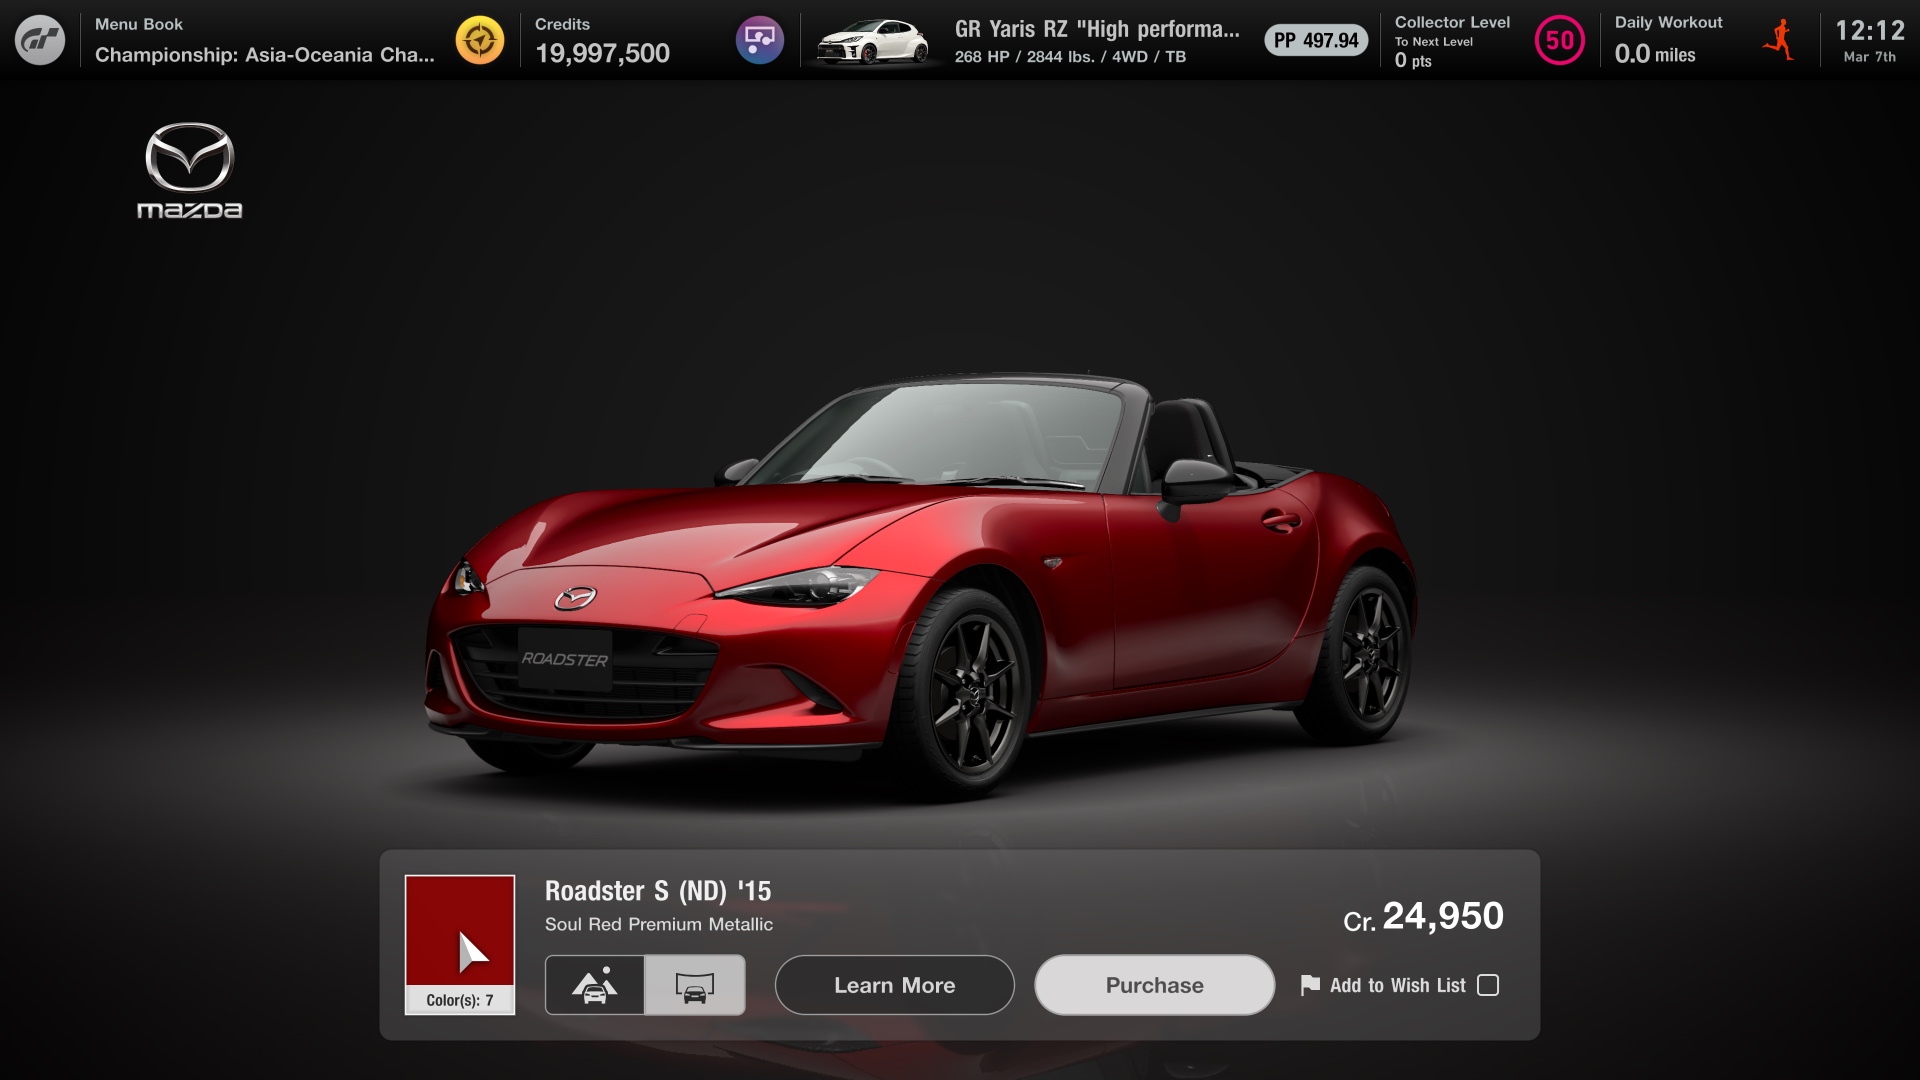 How much would it cost to buy every road car from Gran Turismo?